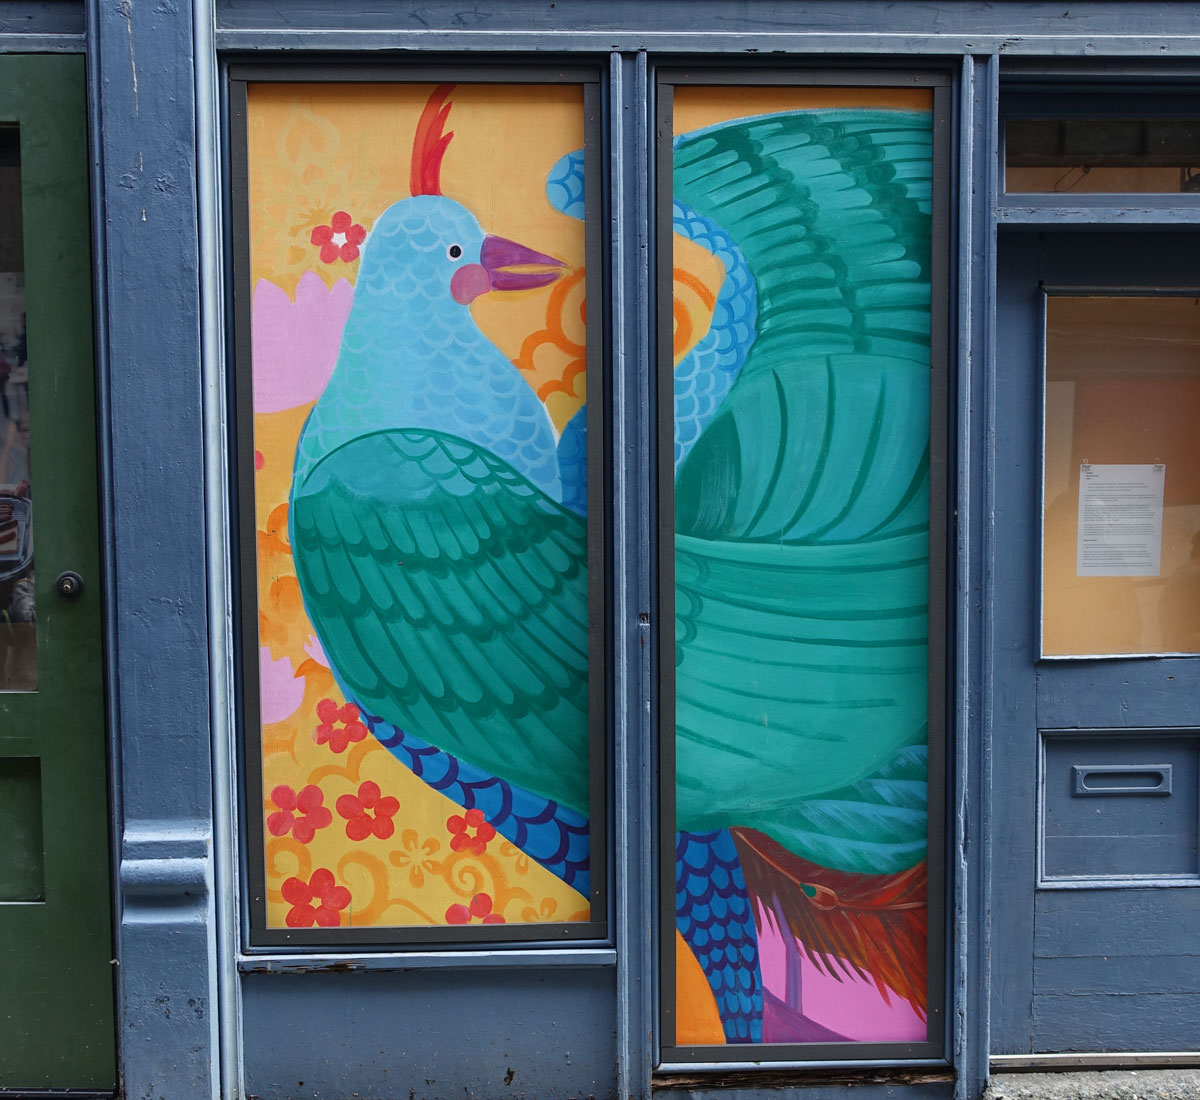 A colorful mural of a pheasant fills two windows of a city building.